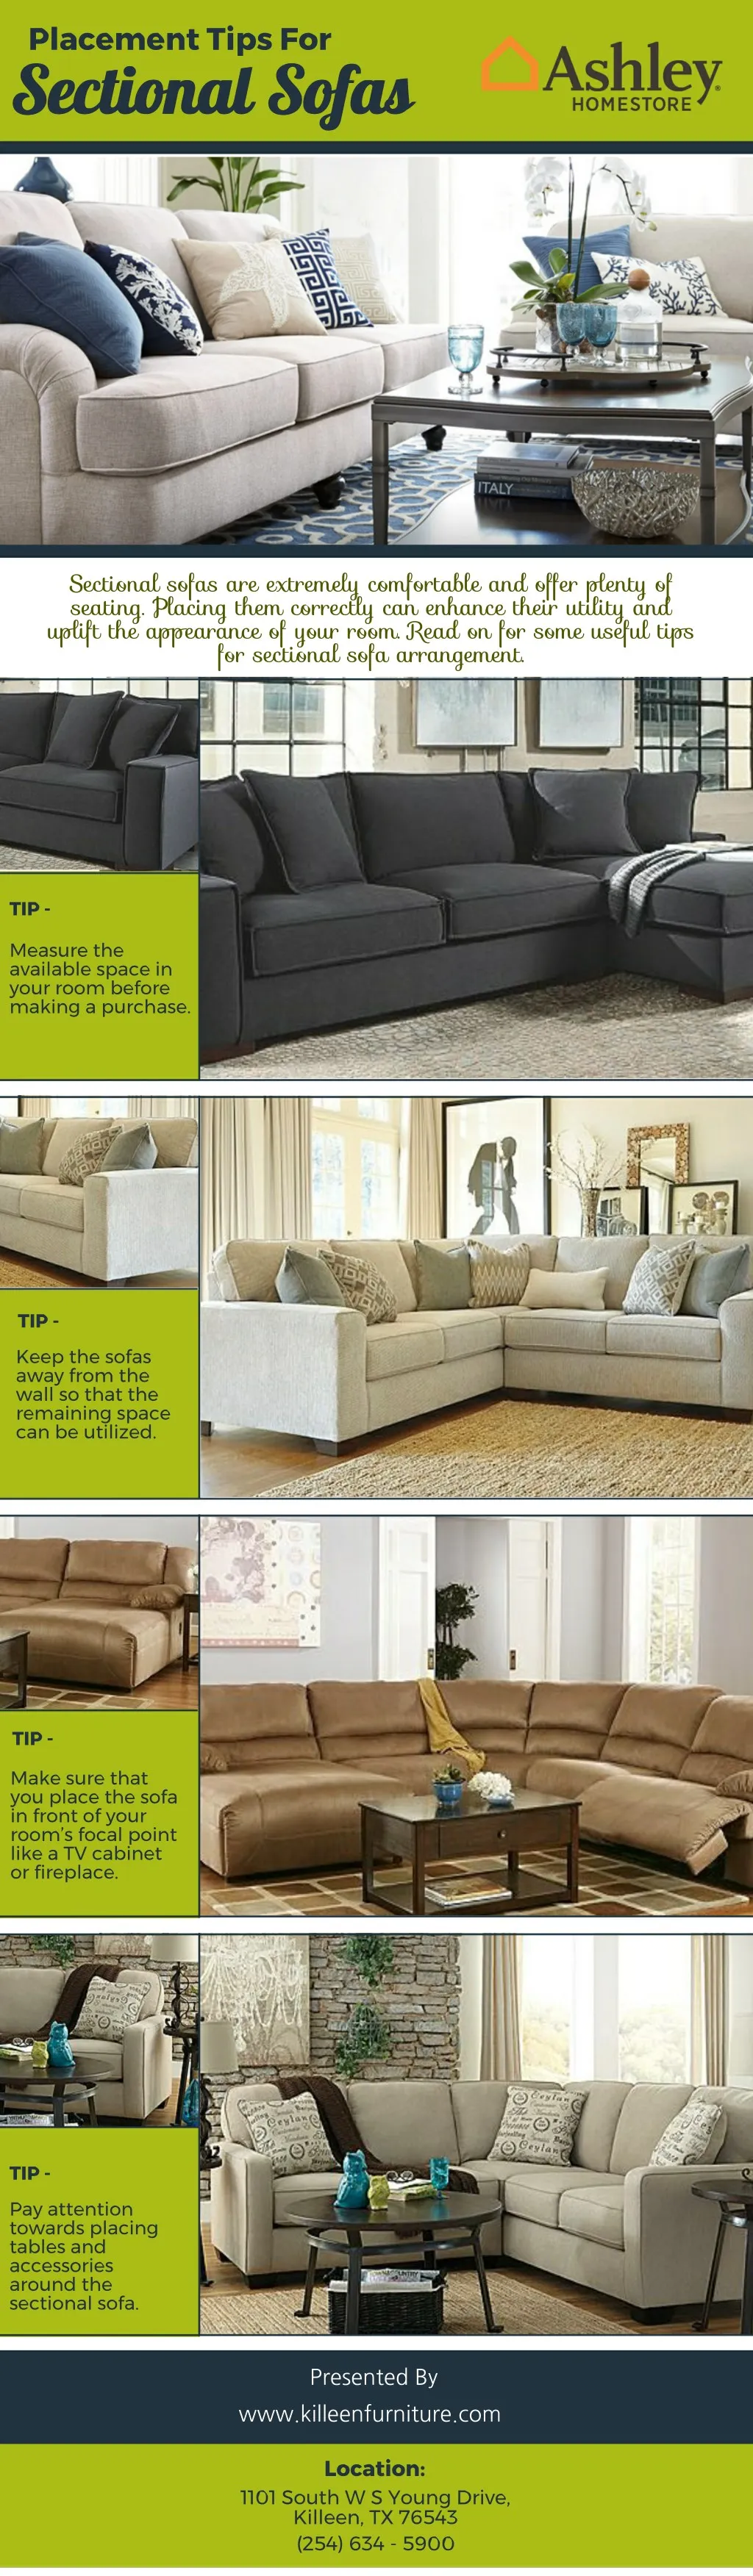 placement tips for sectional sofas sectional sofas